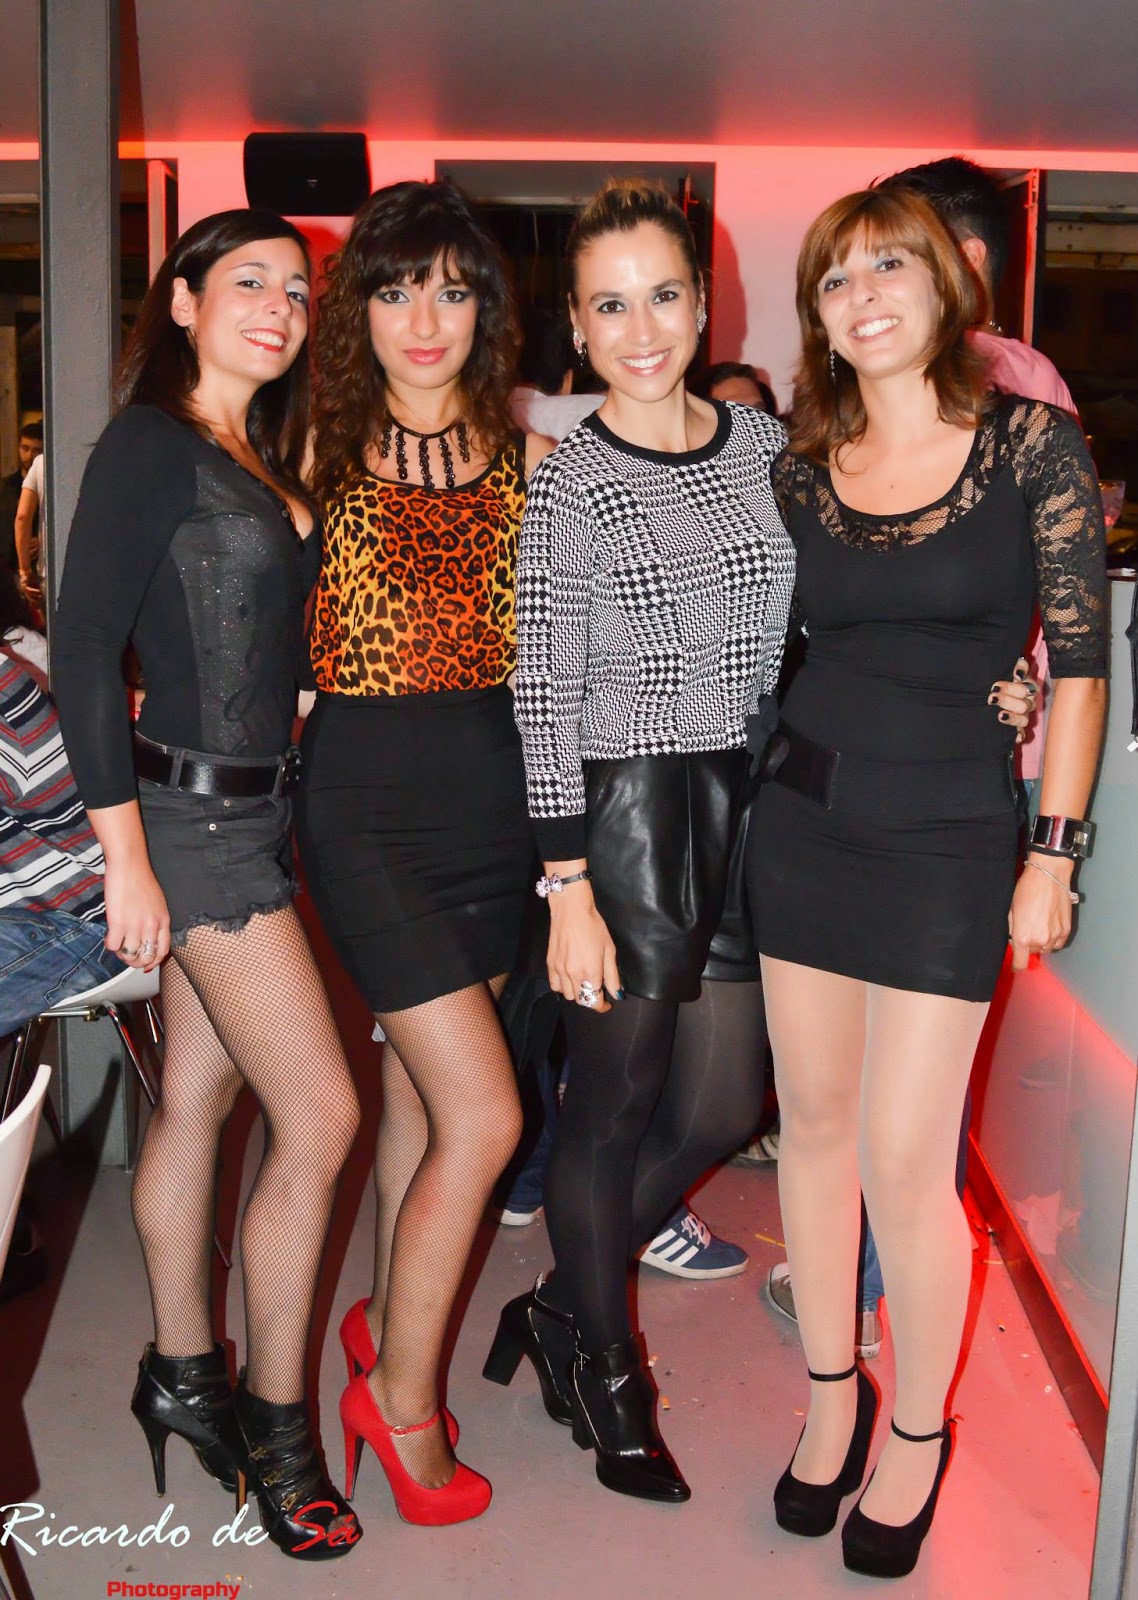 PORTUGAL PANTYHOSE: Portuguese Party Girls